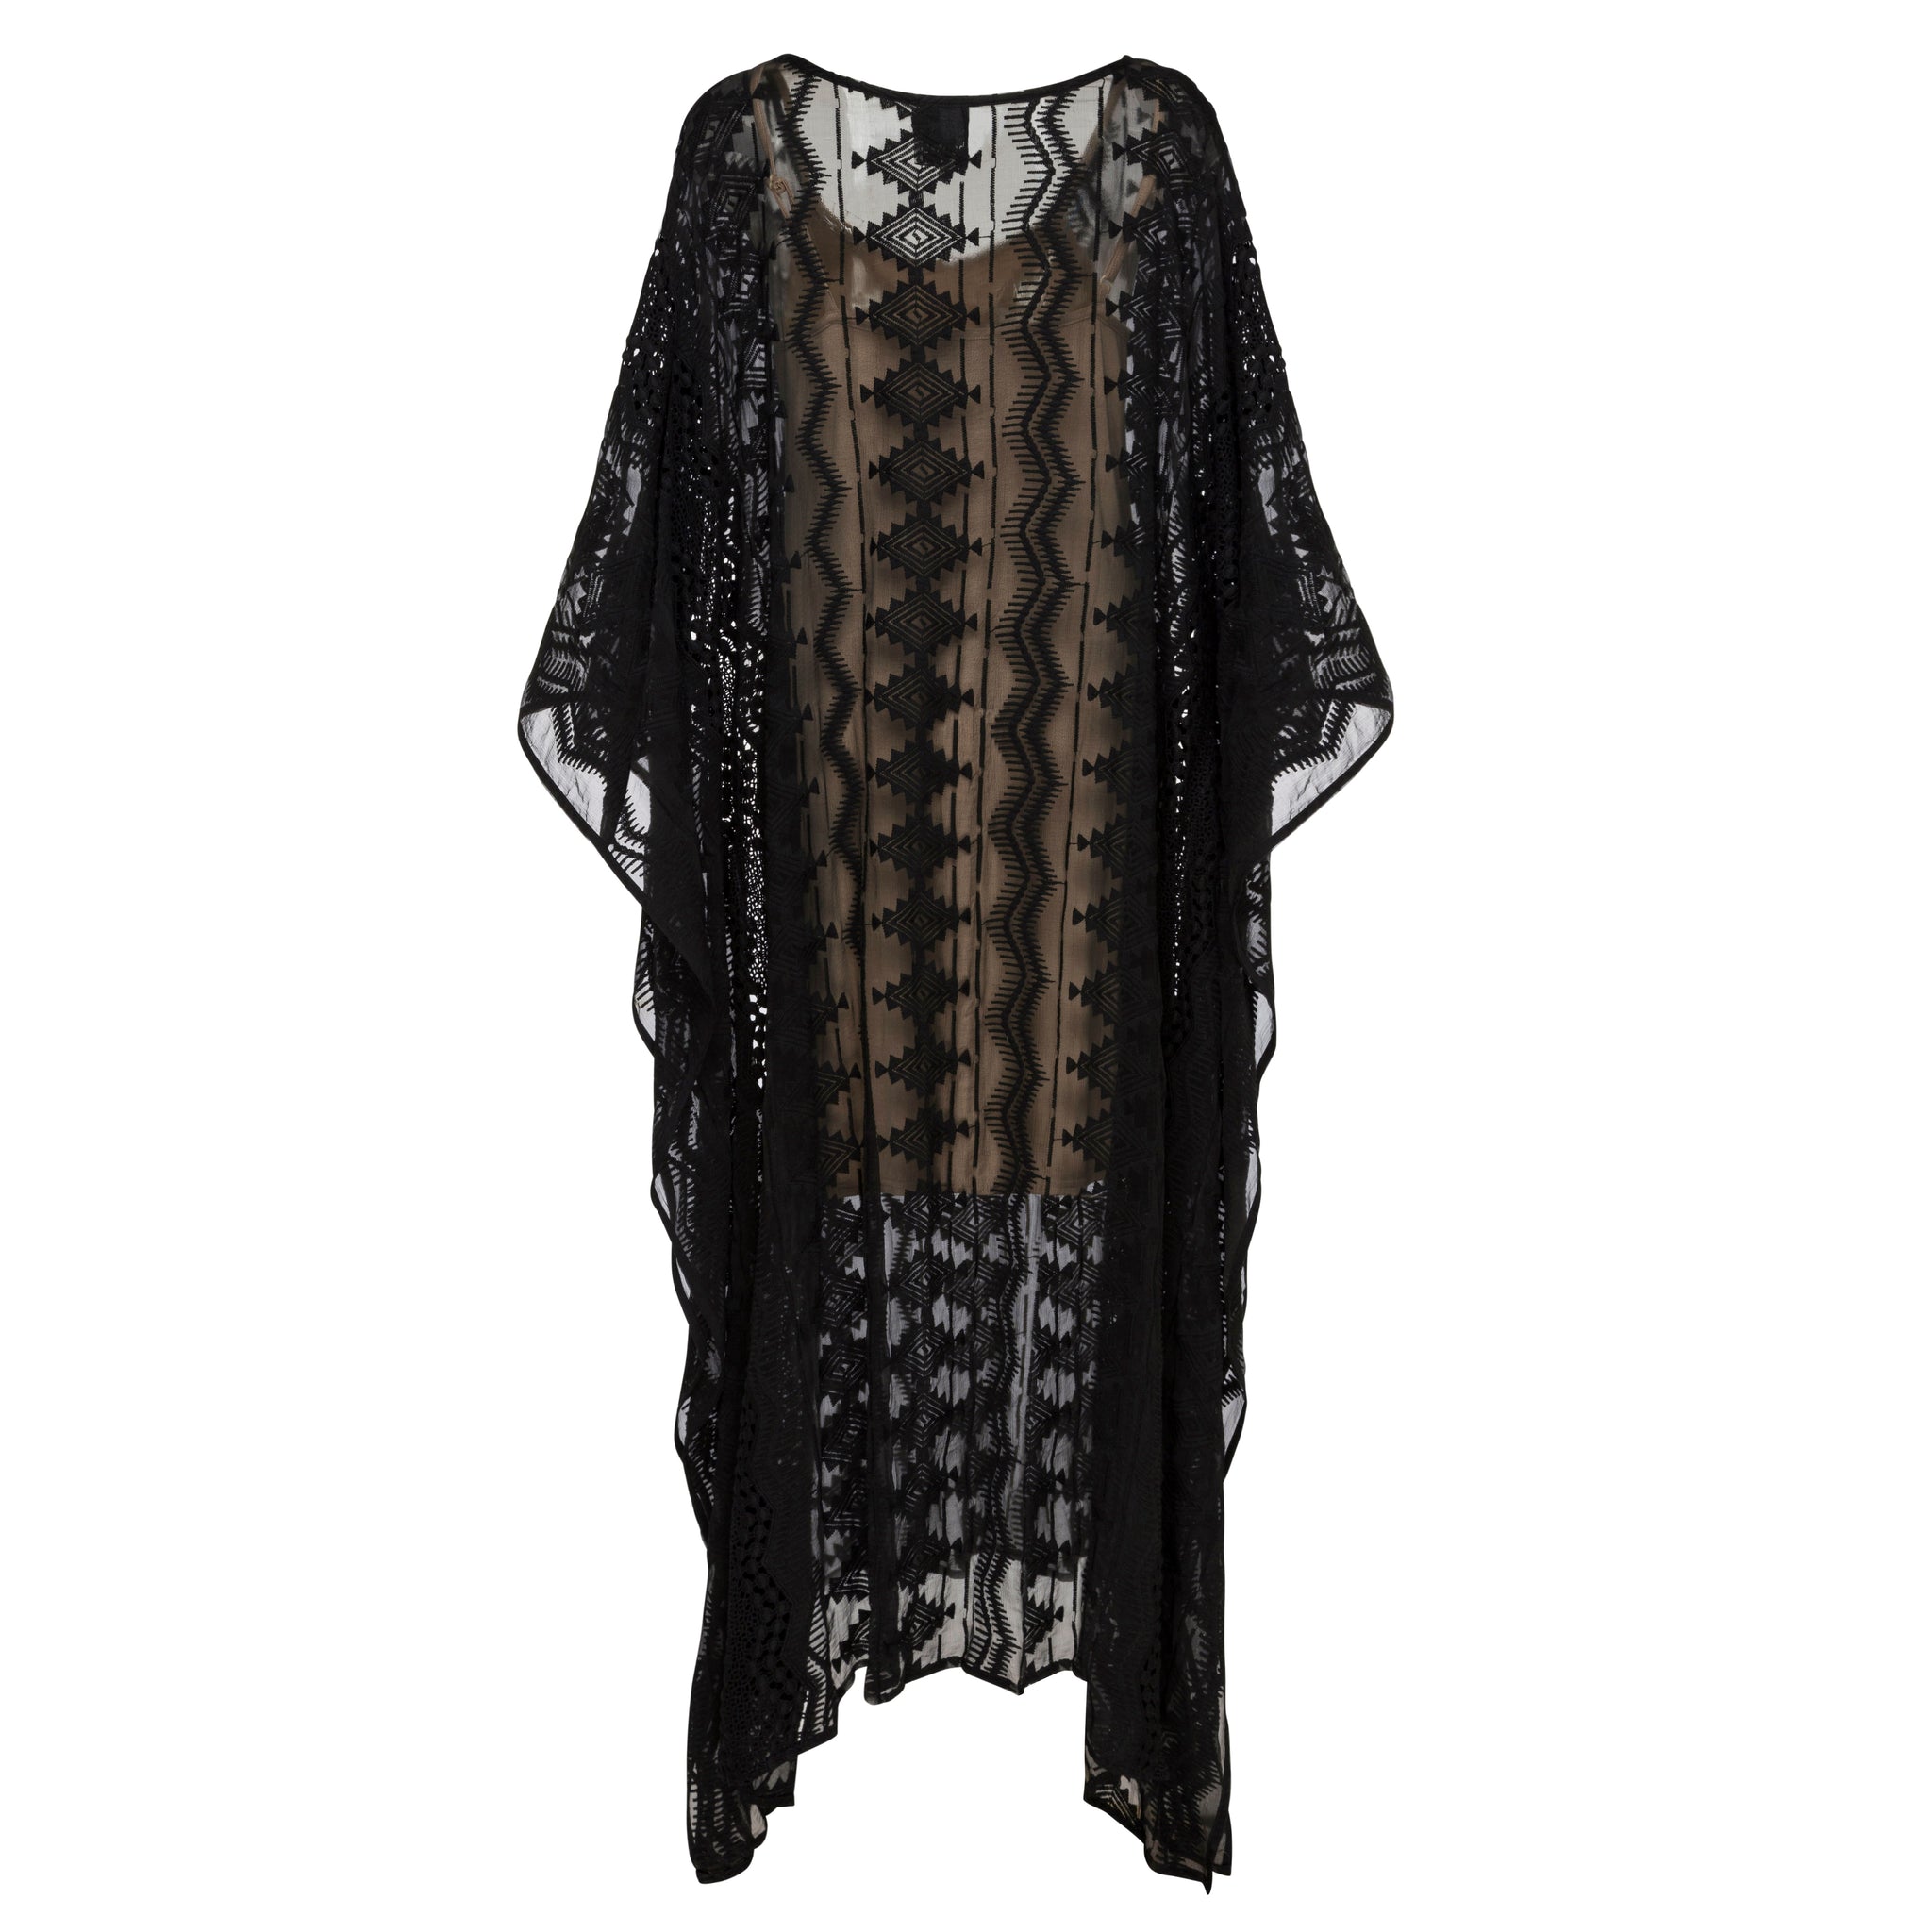 Aztec Kameez Dress - Pure Silk Yoryu Exclusive Embroidery